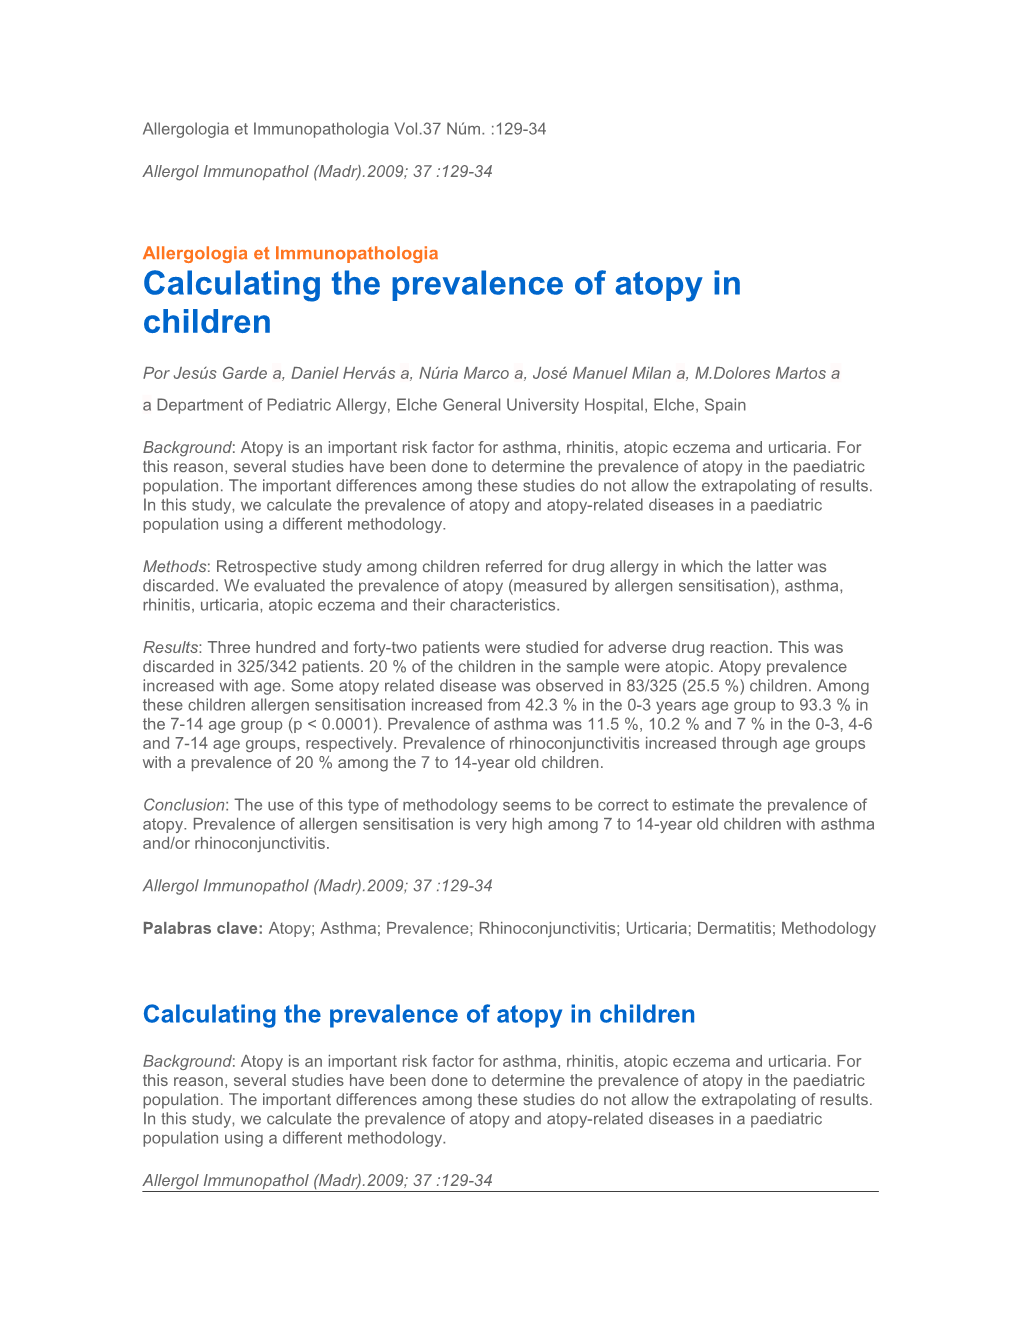 Calculating the Prevalence of Atopy in Children